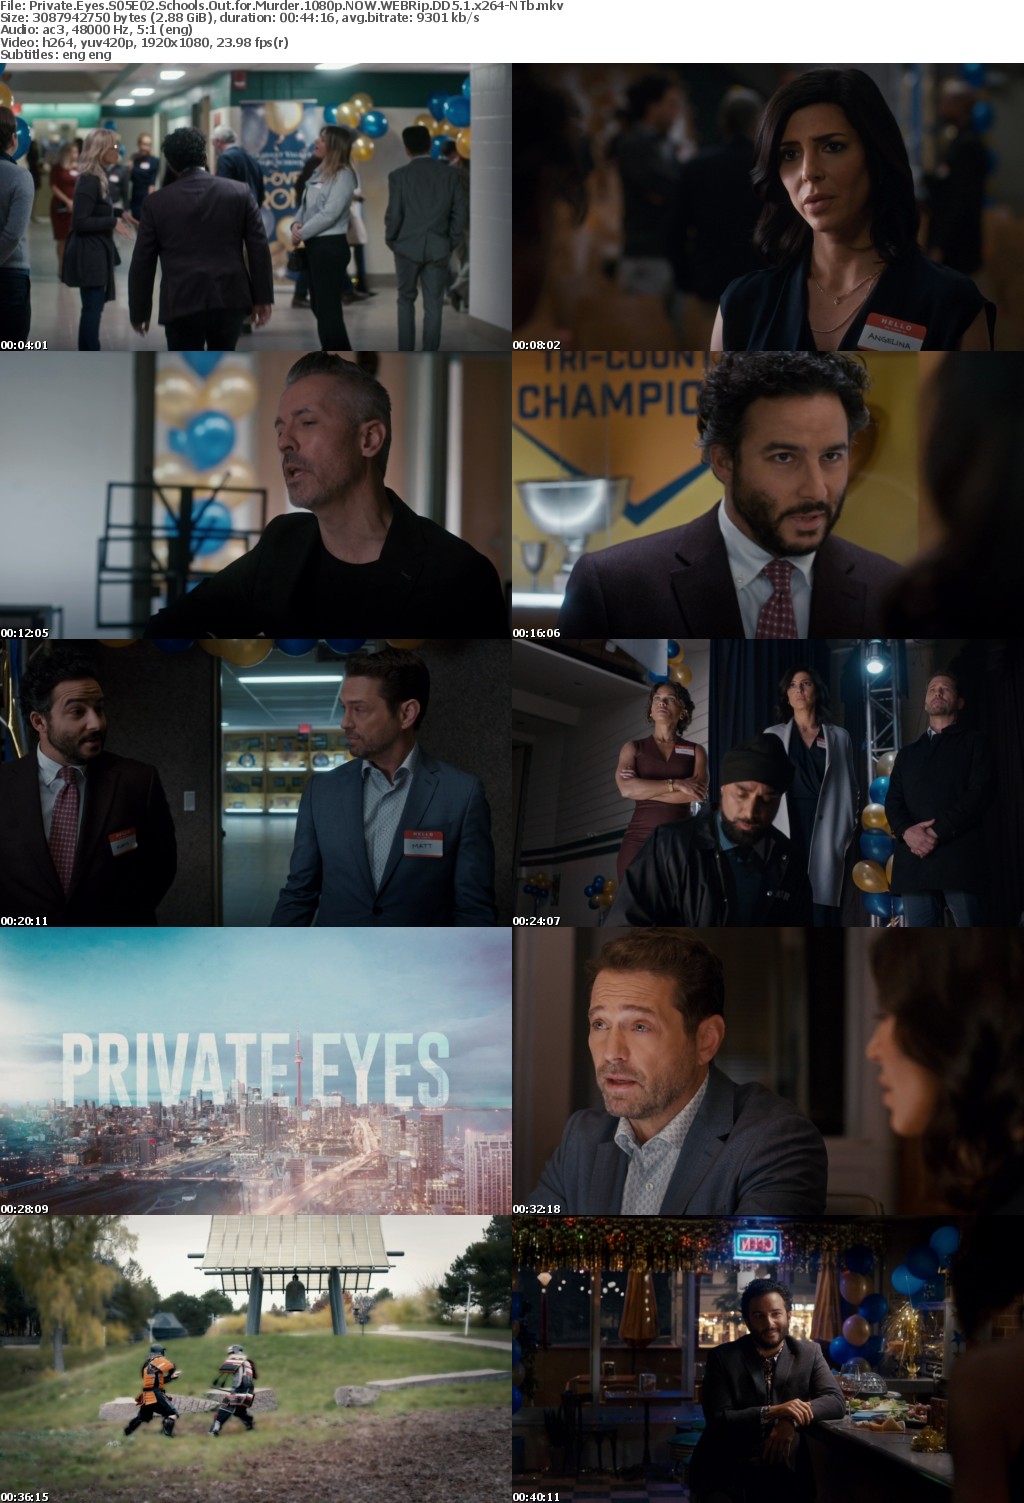 Private Eyes S05E02 Schools Out for Murder 1080p NOW WEBRip DD5 1 x264-NTb